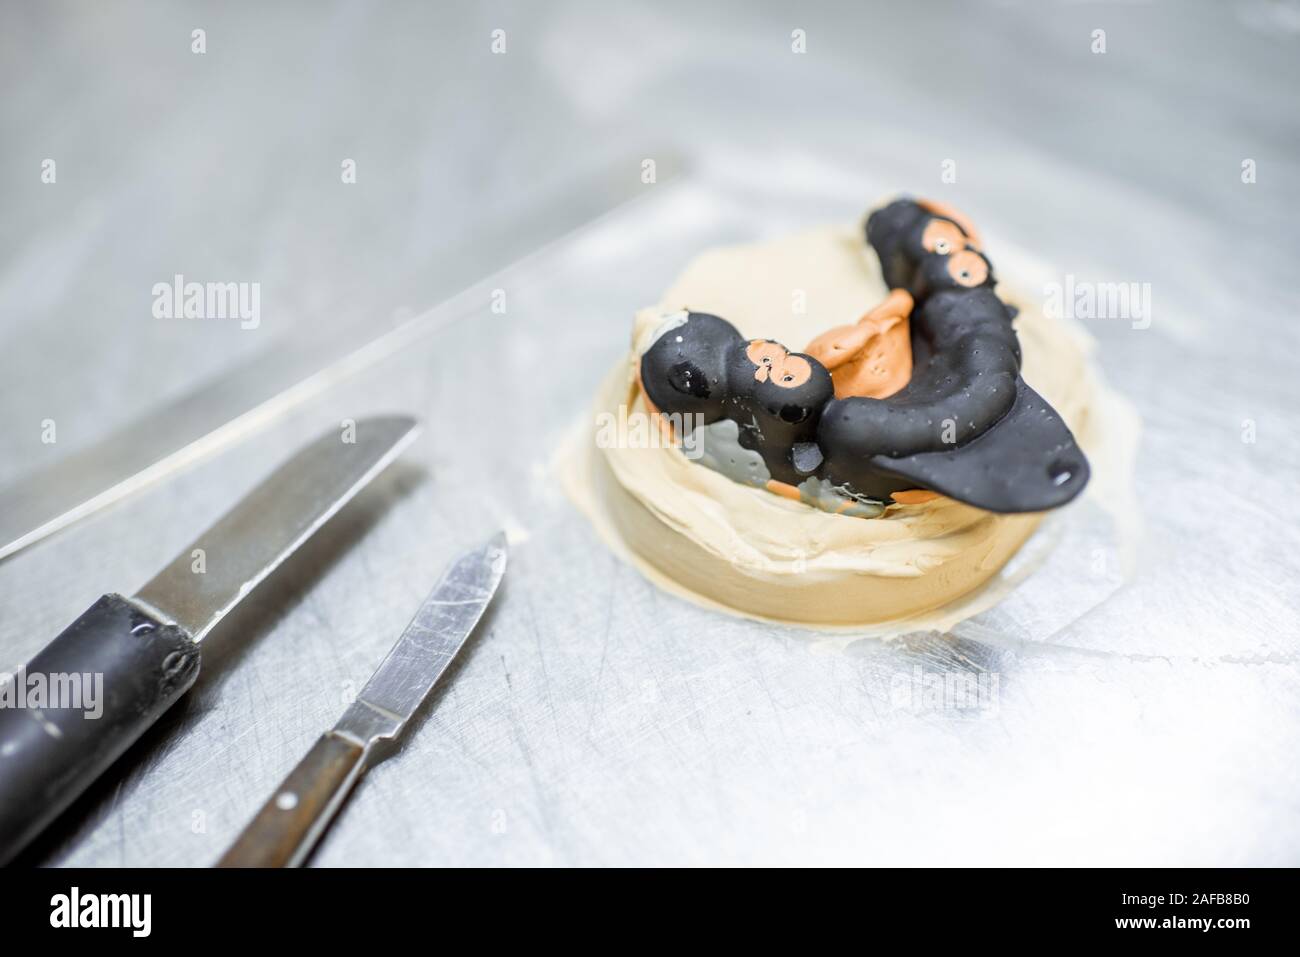 Jaw imprint on the gypsum form drying on the table in laboratory, close-up with dental working tools Stock Photo